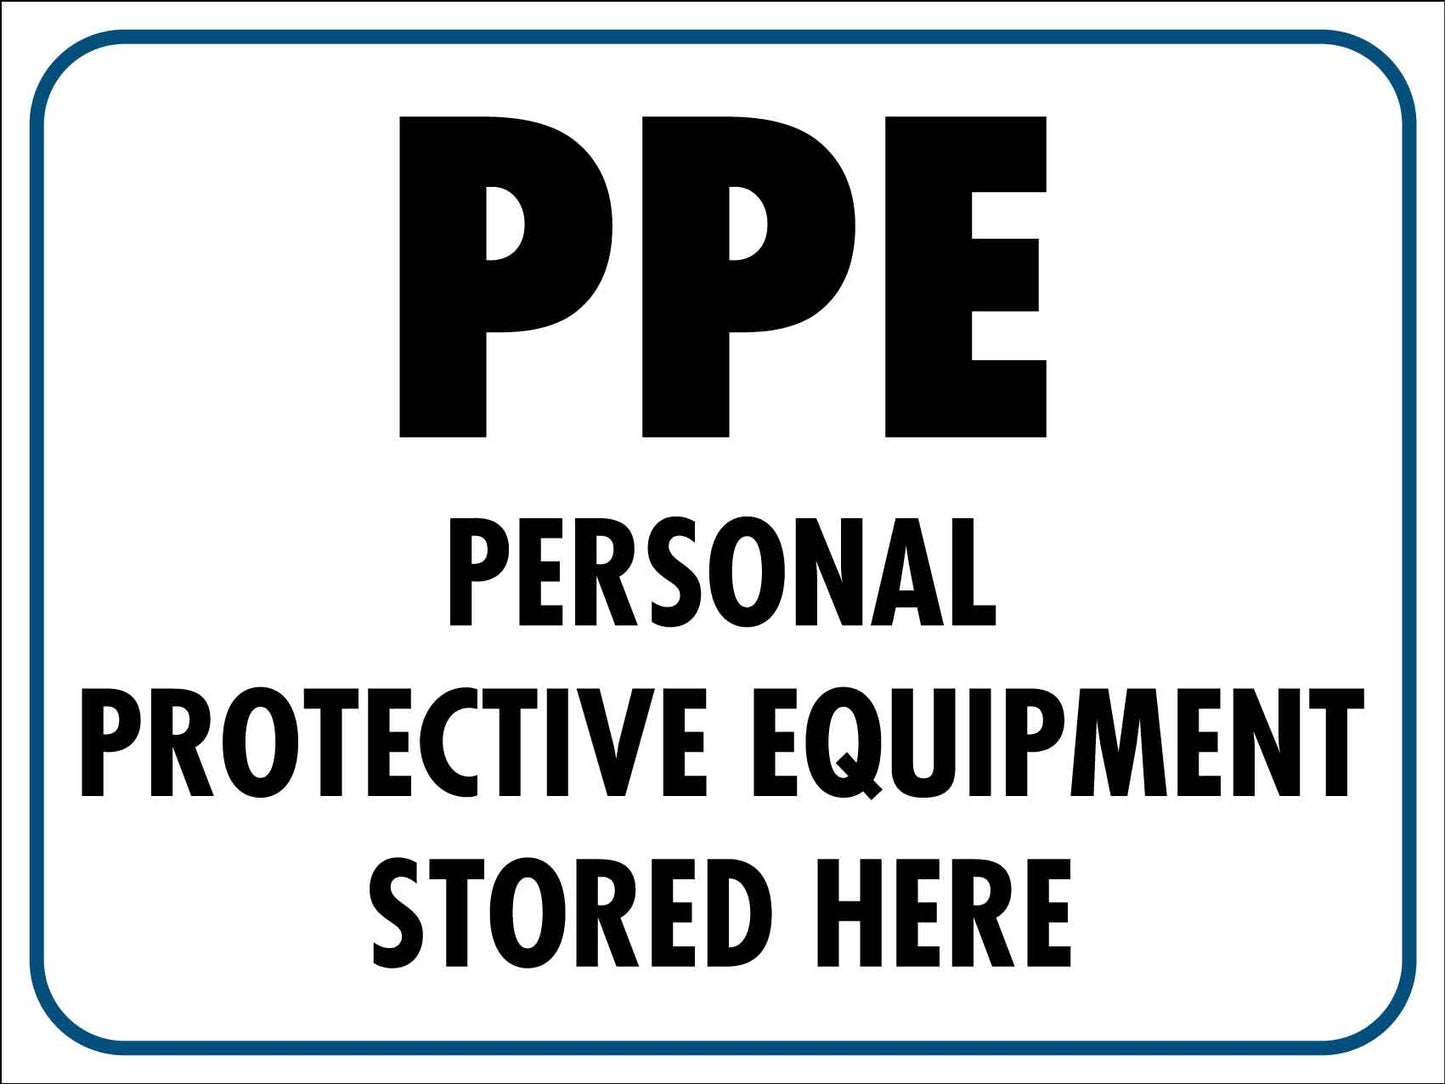 PPE Personal Protective Equipment Stored Here Sign